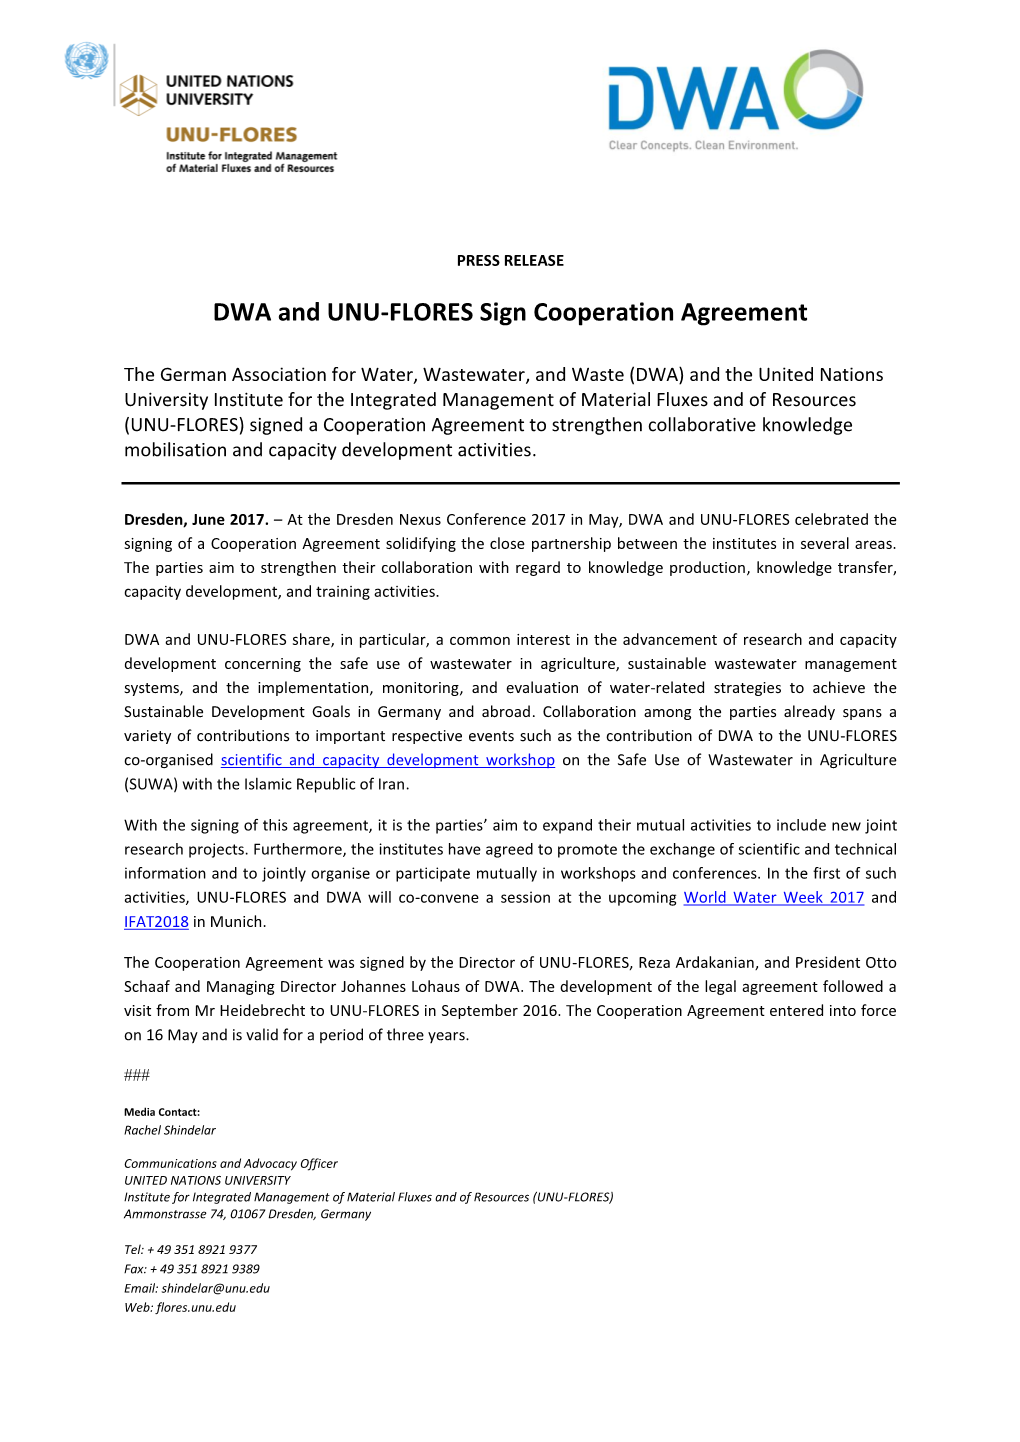 DWA and UNU-FLORES Sign Cooperation Agreement